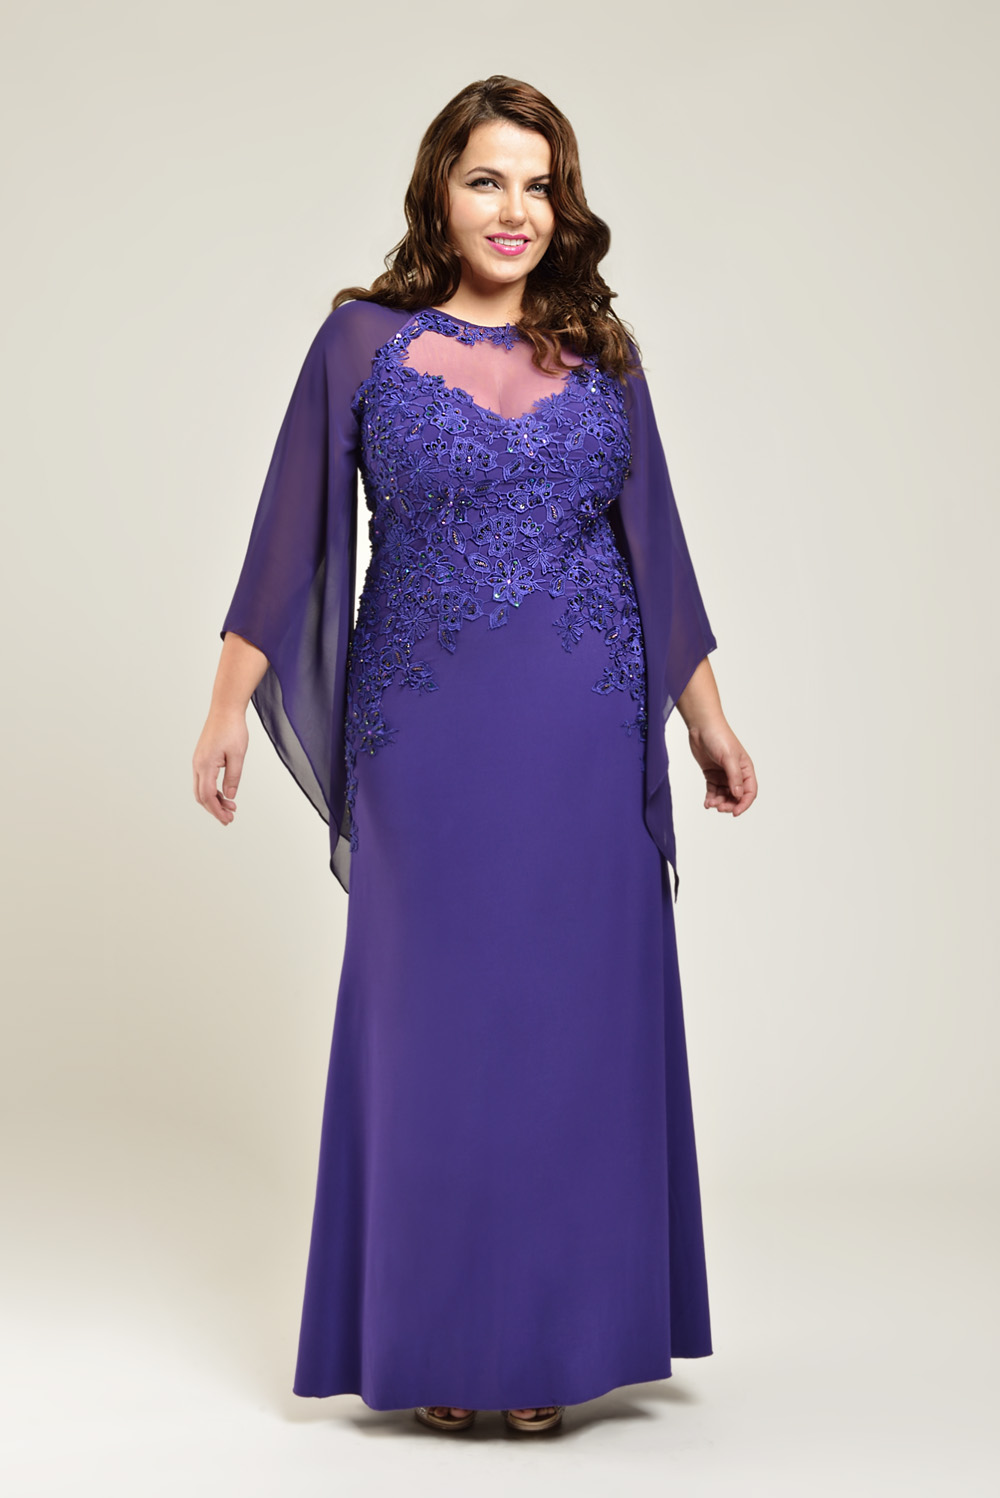 PLUS SIZE chiffon & lace, sleeved evening dress - REDUCED at Ball Gown ...